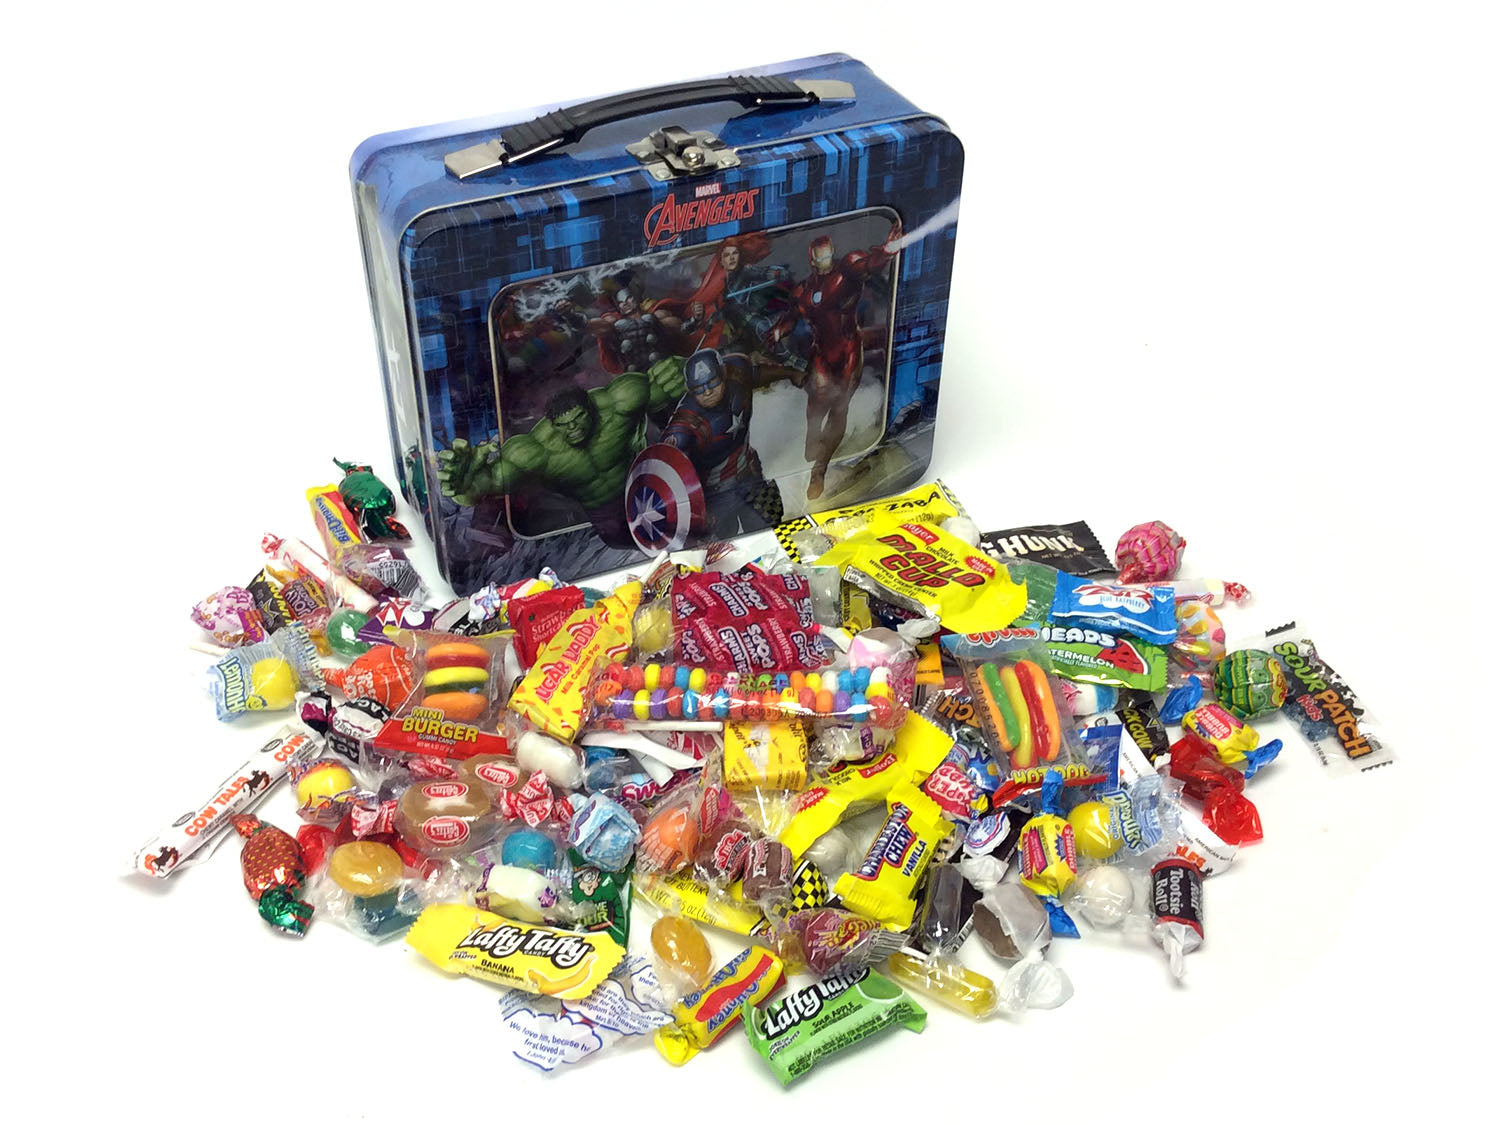 Lunch Box - Avengers Window Box - Penny Candy assortment